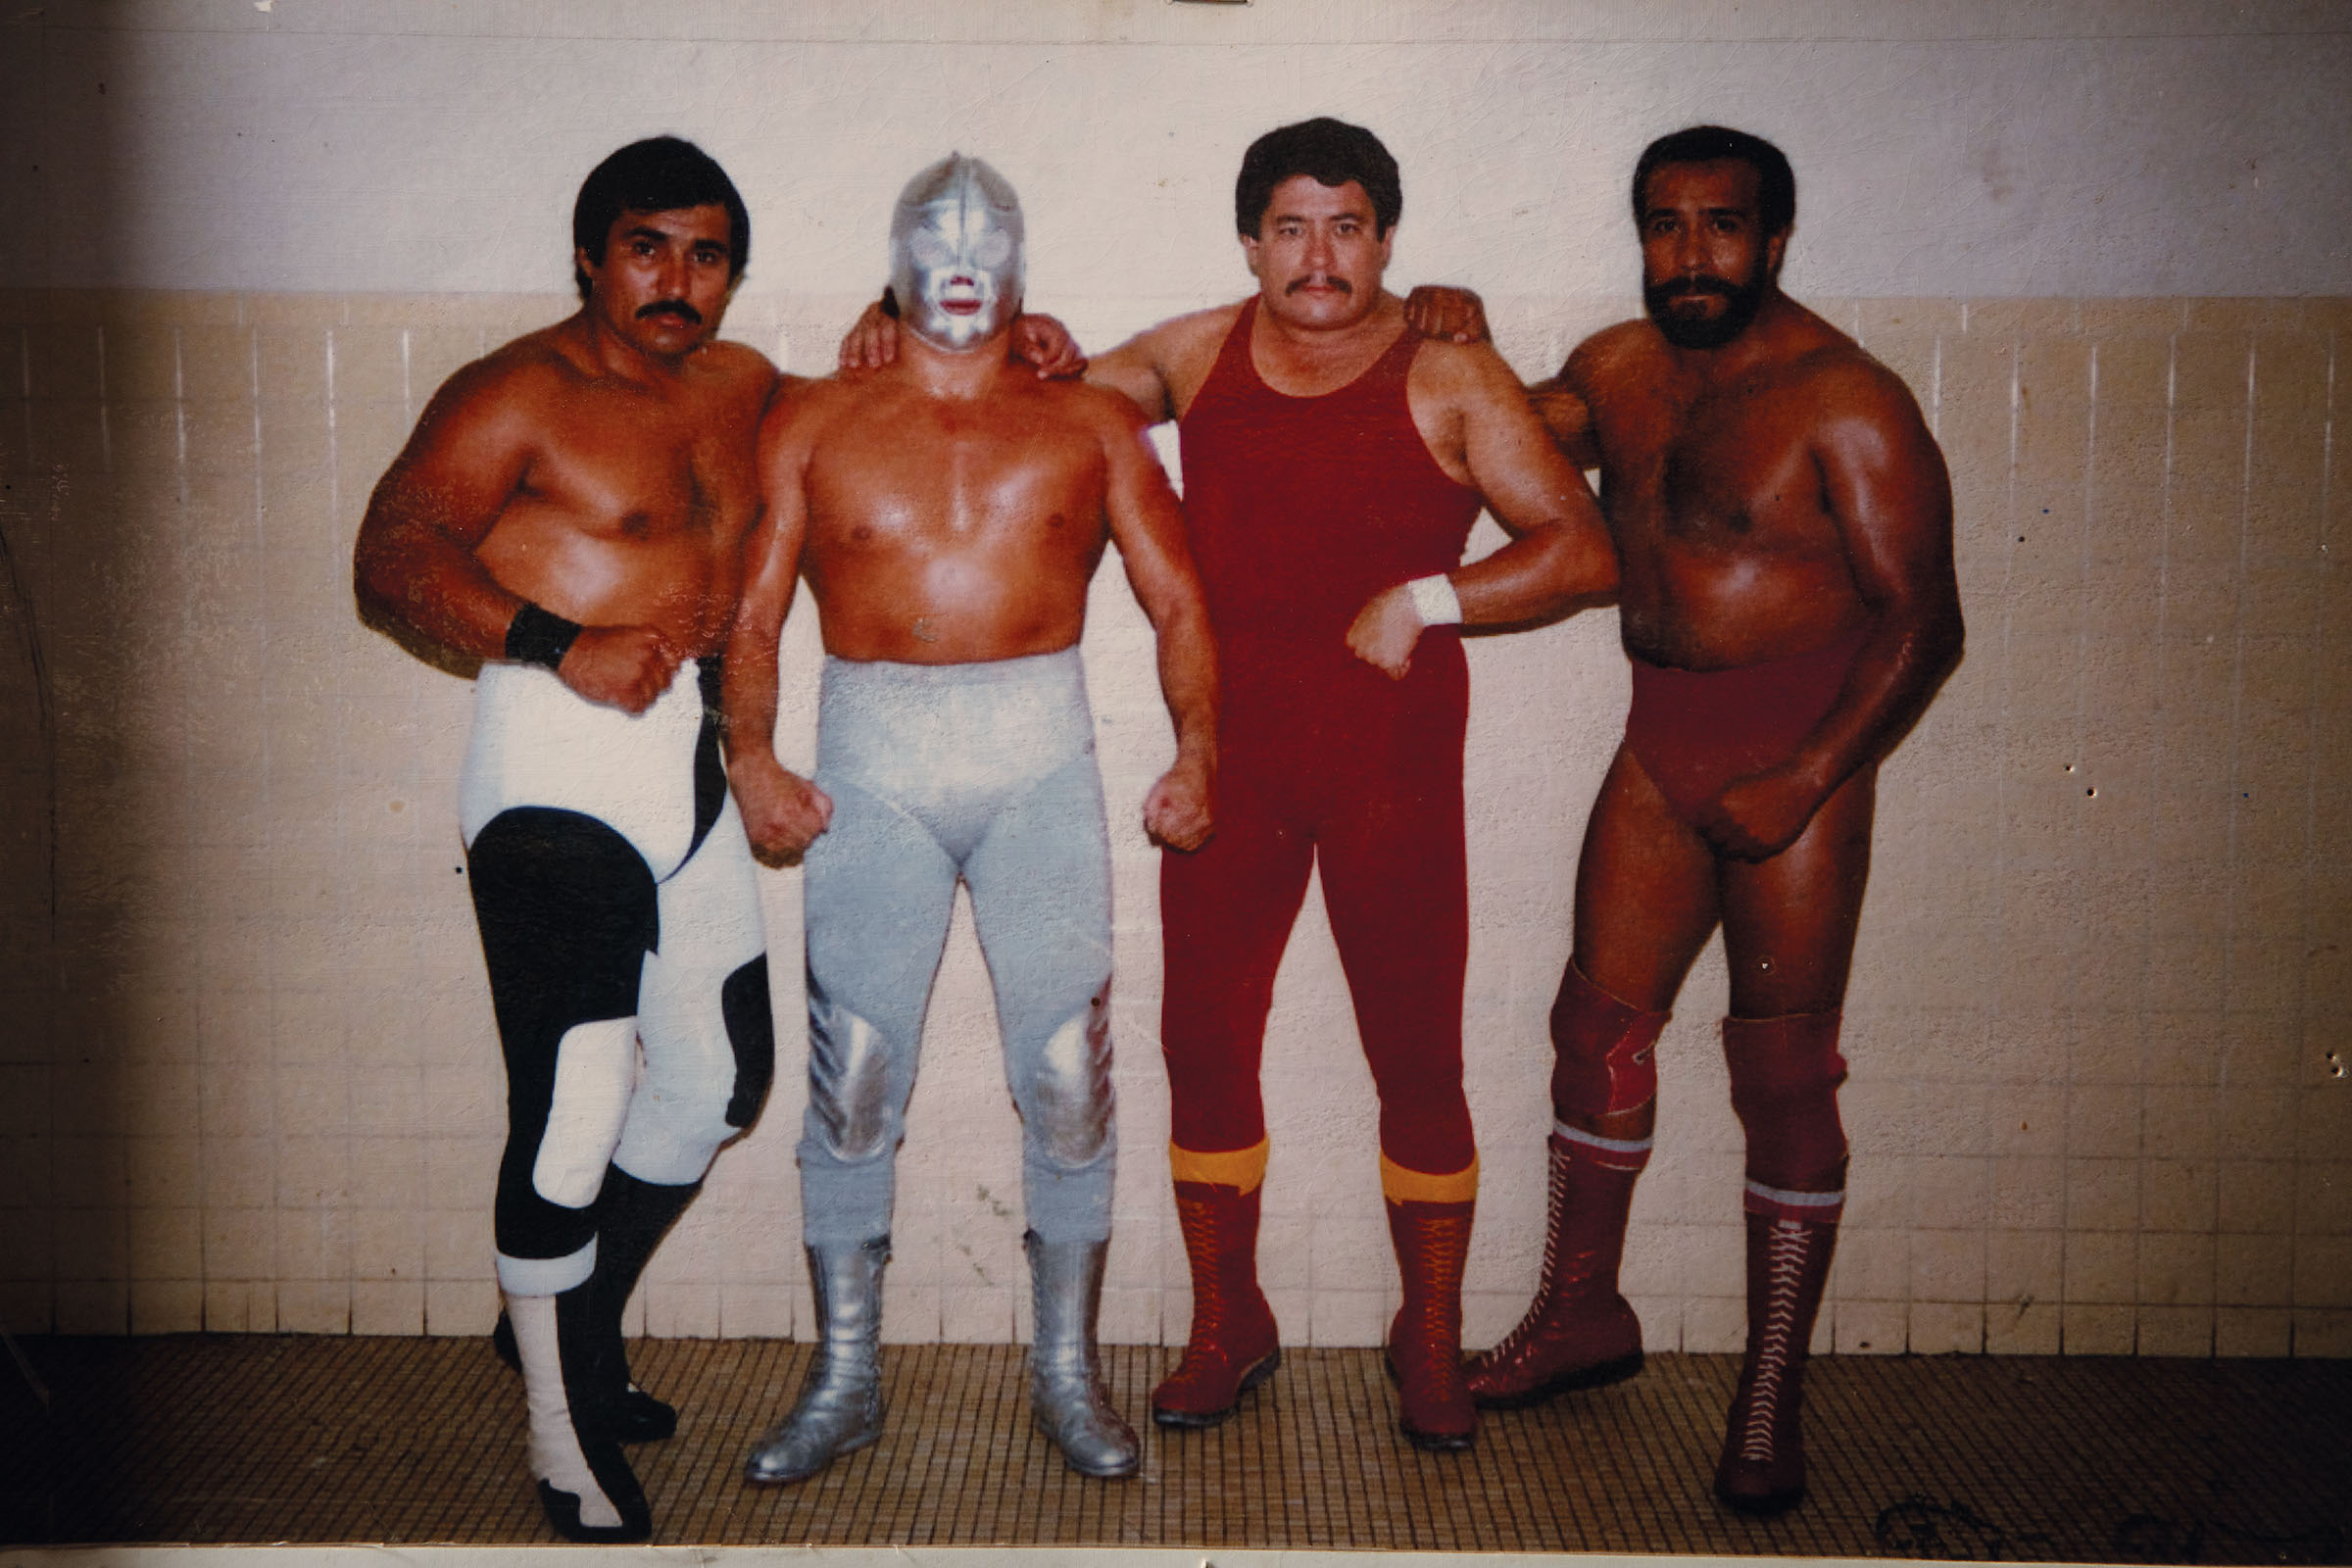 A group of men dressed in lucha libre uniforms pose in front of a wall